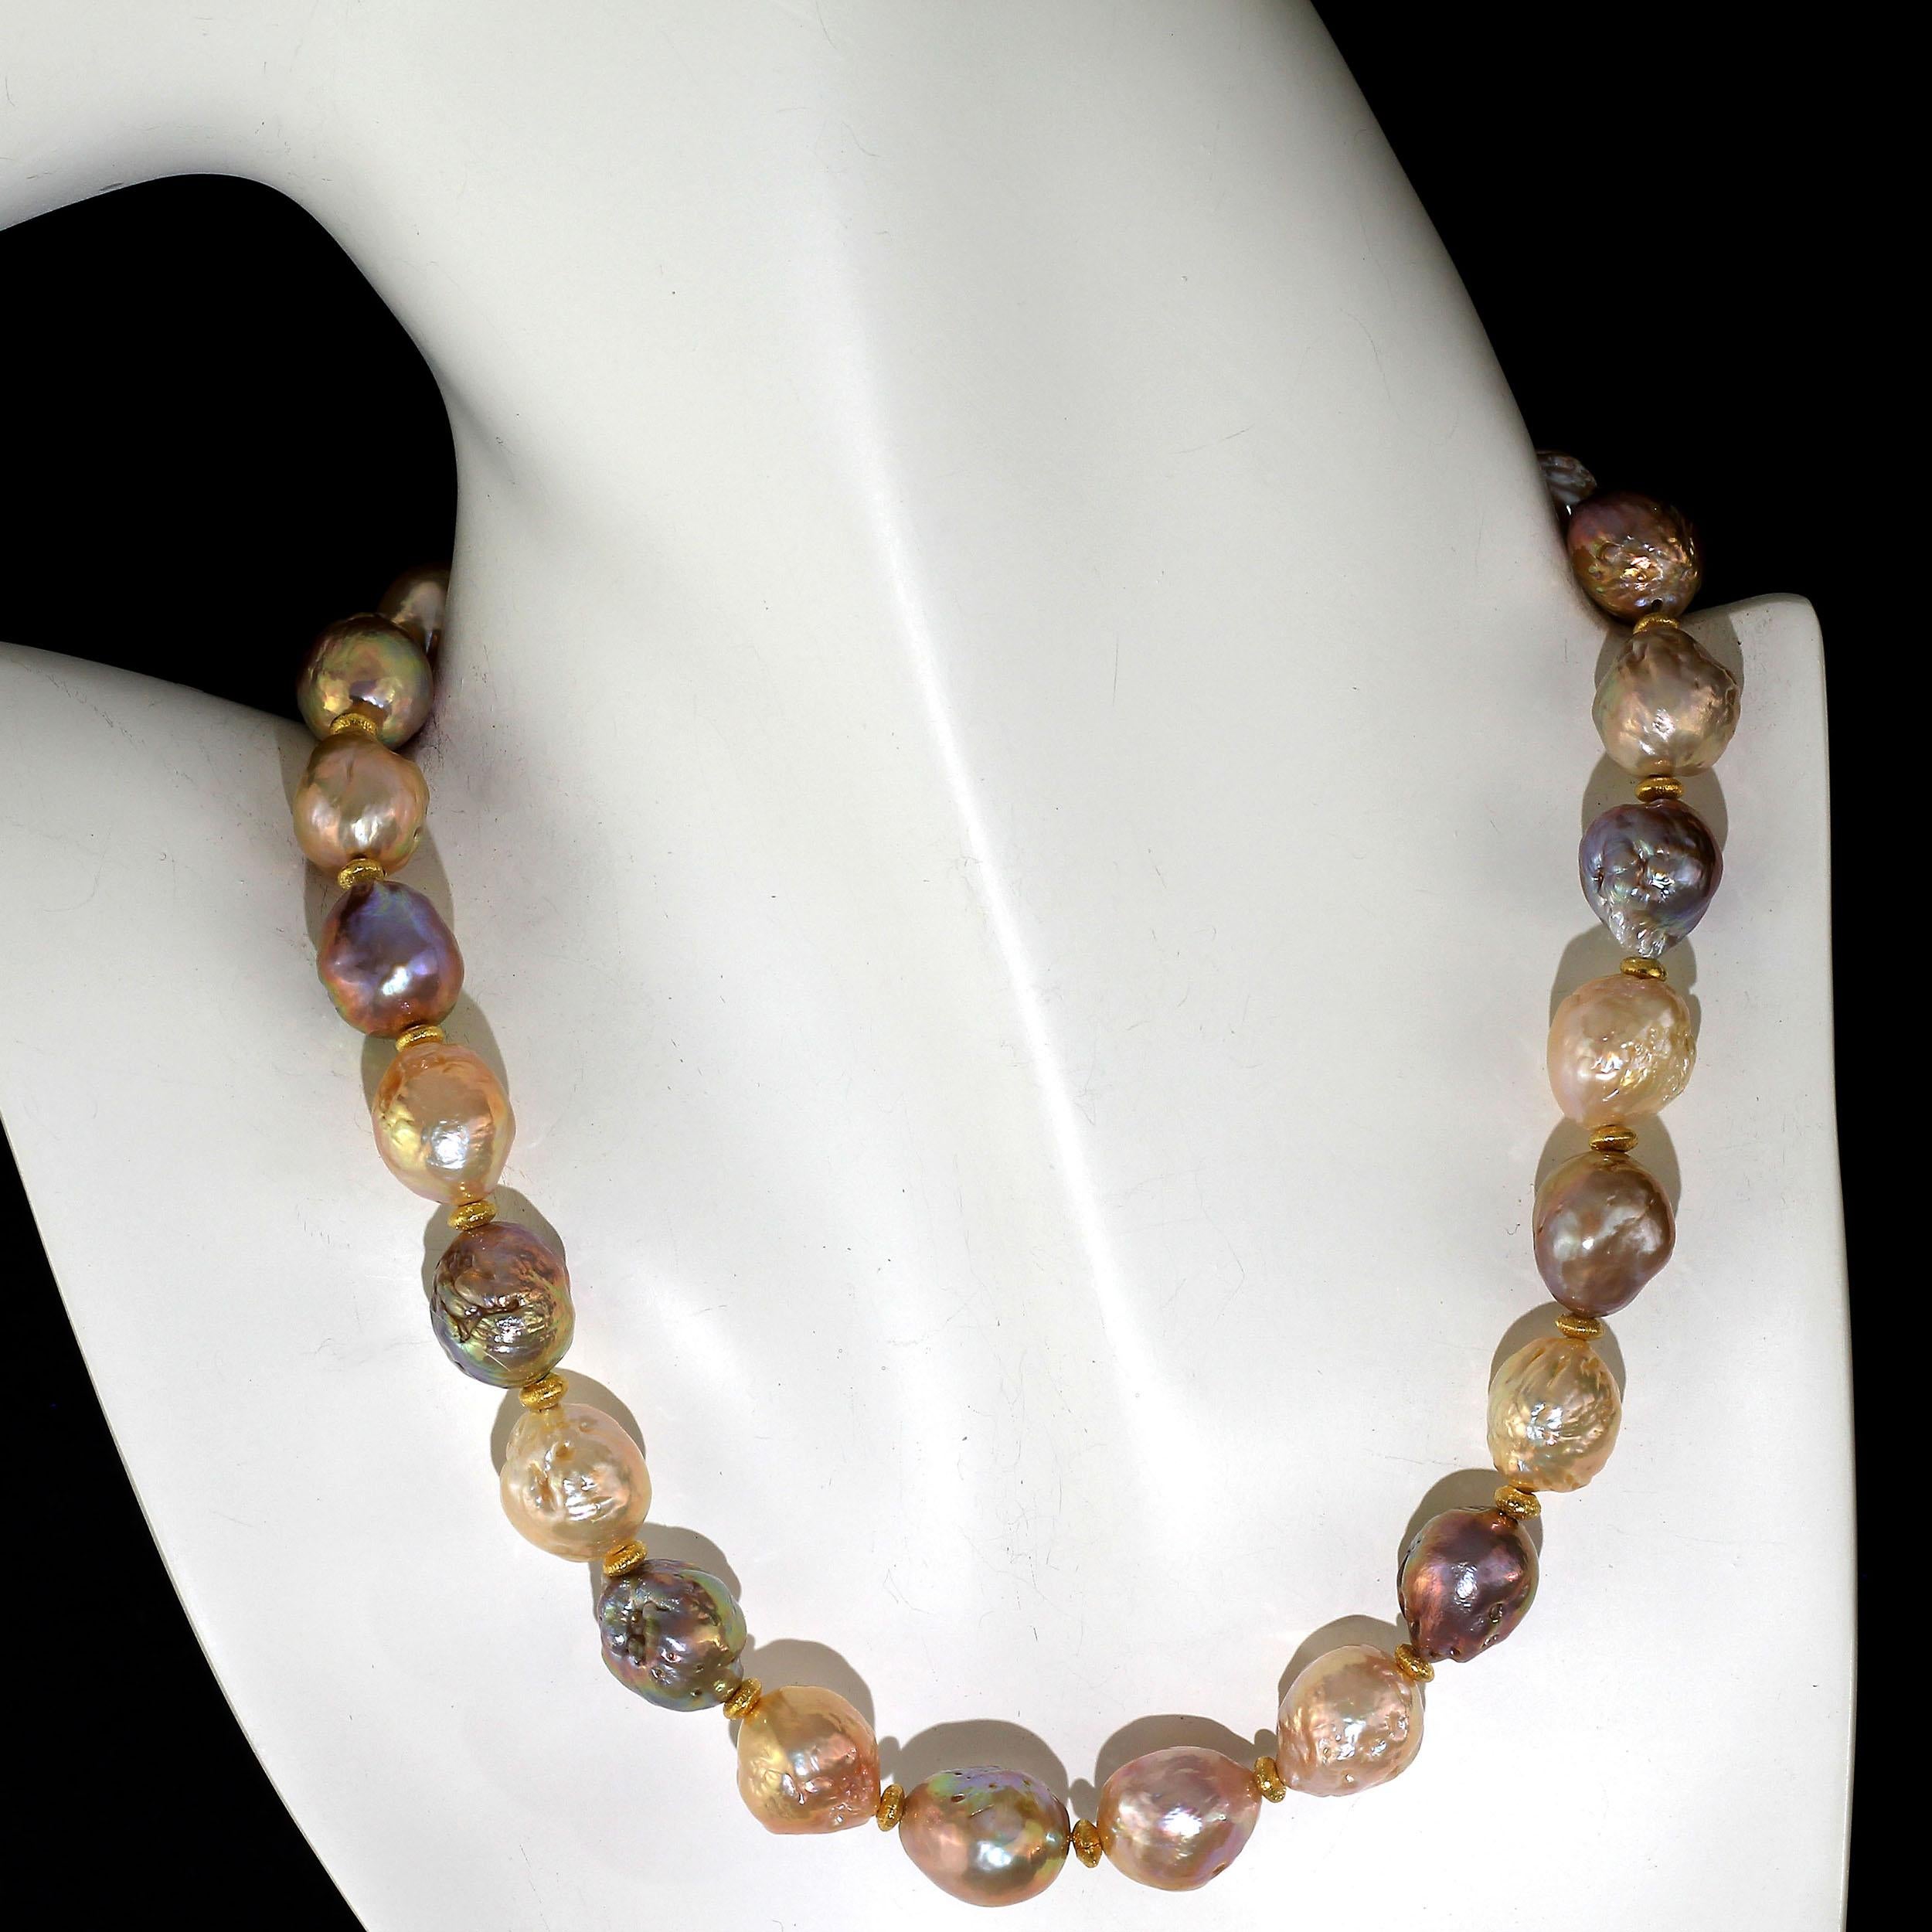 Artisan Gemjunky Choker Necklace of Natural Color Multi Tone Baroque Pearls